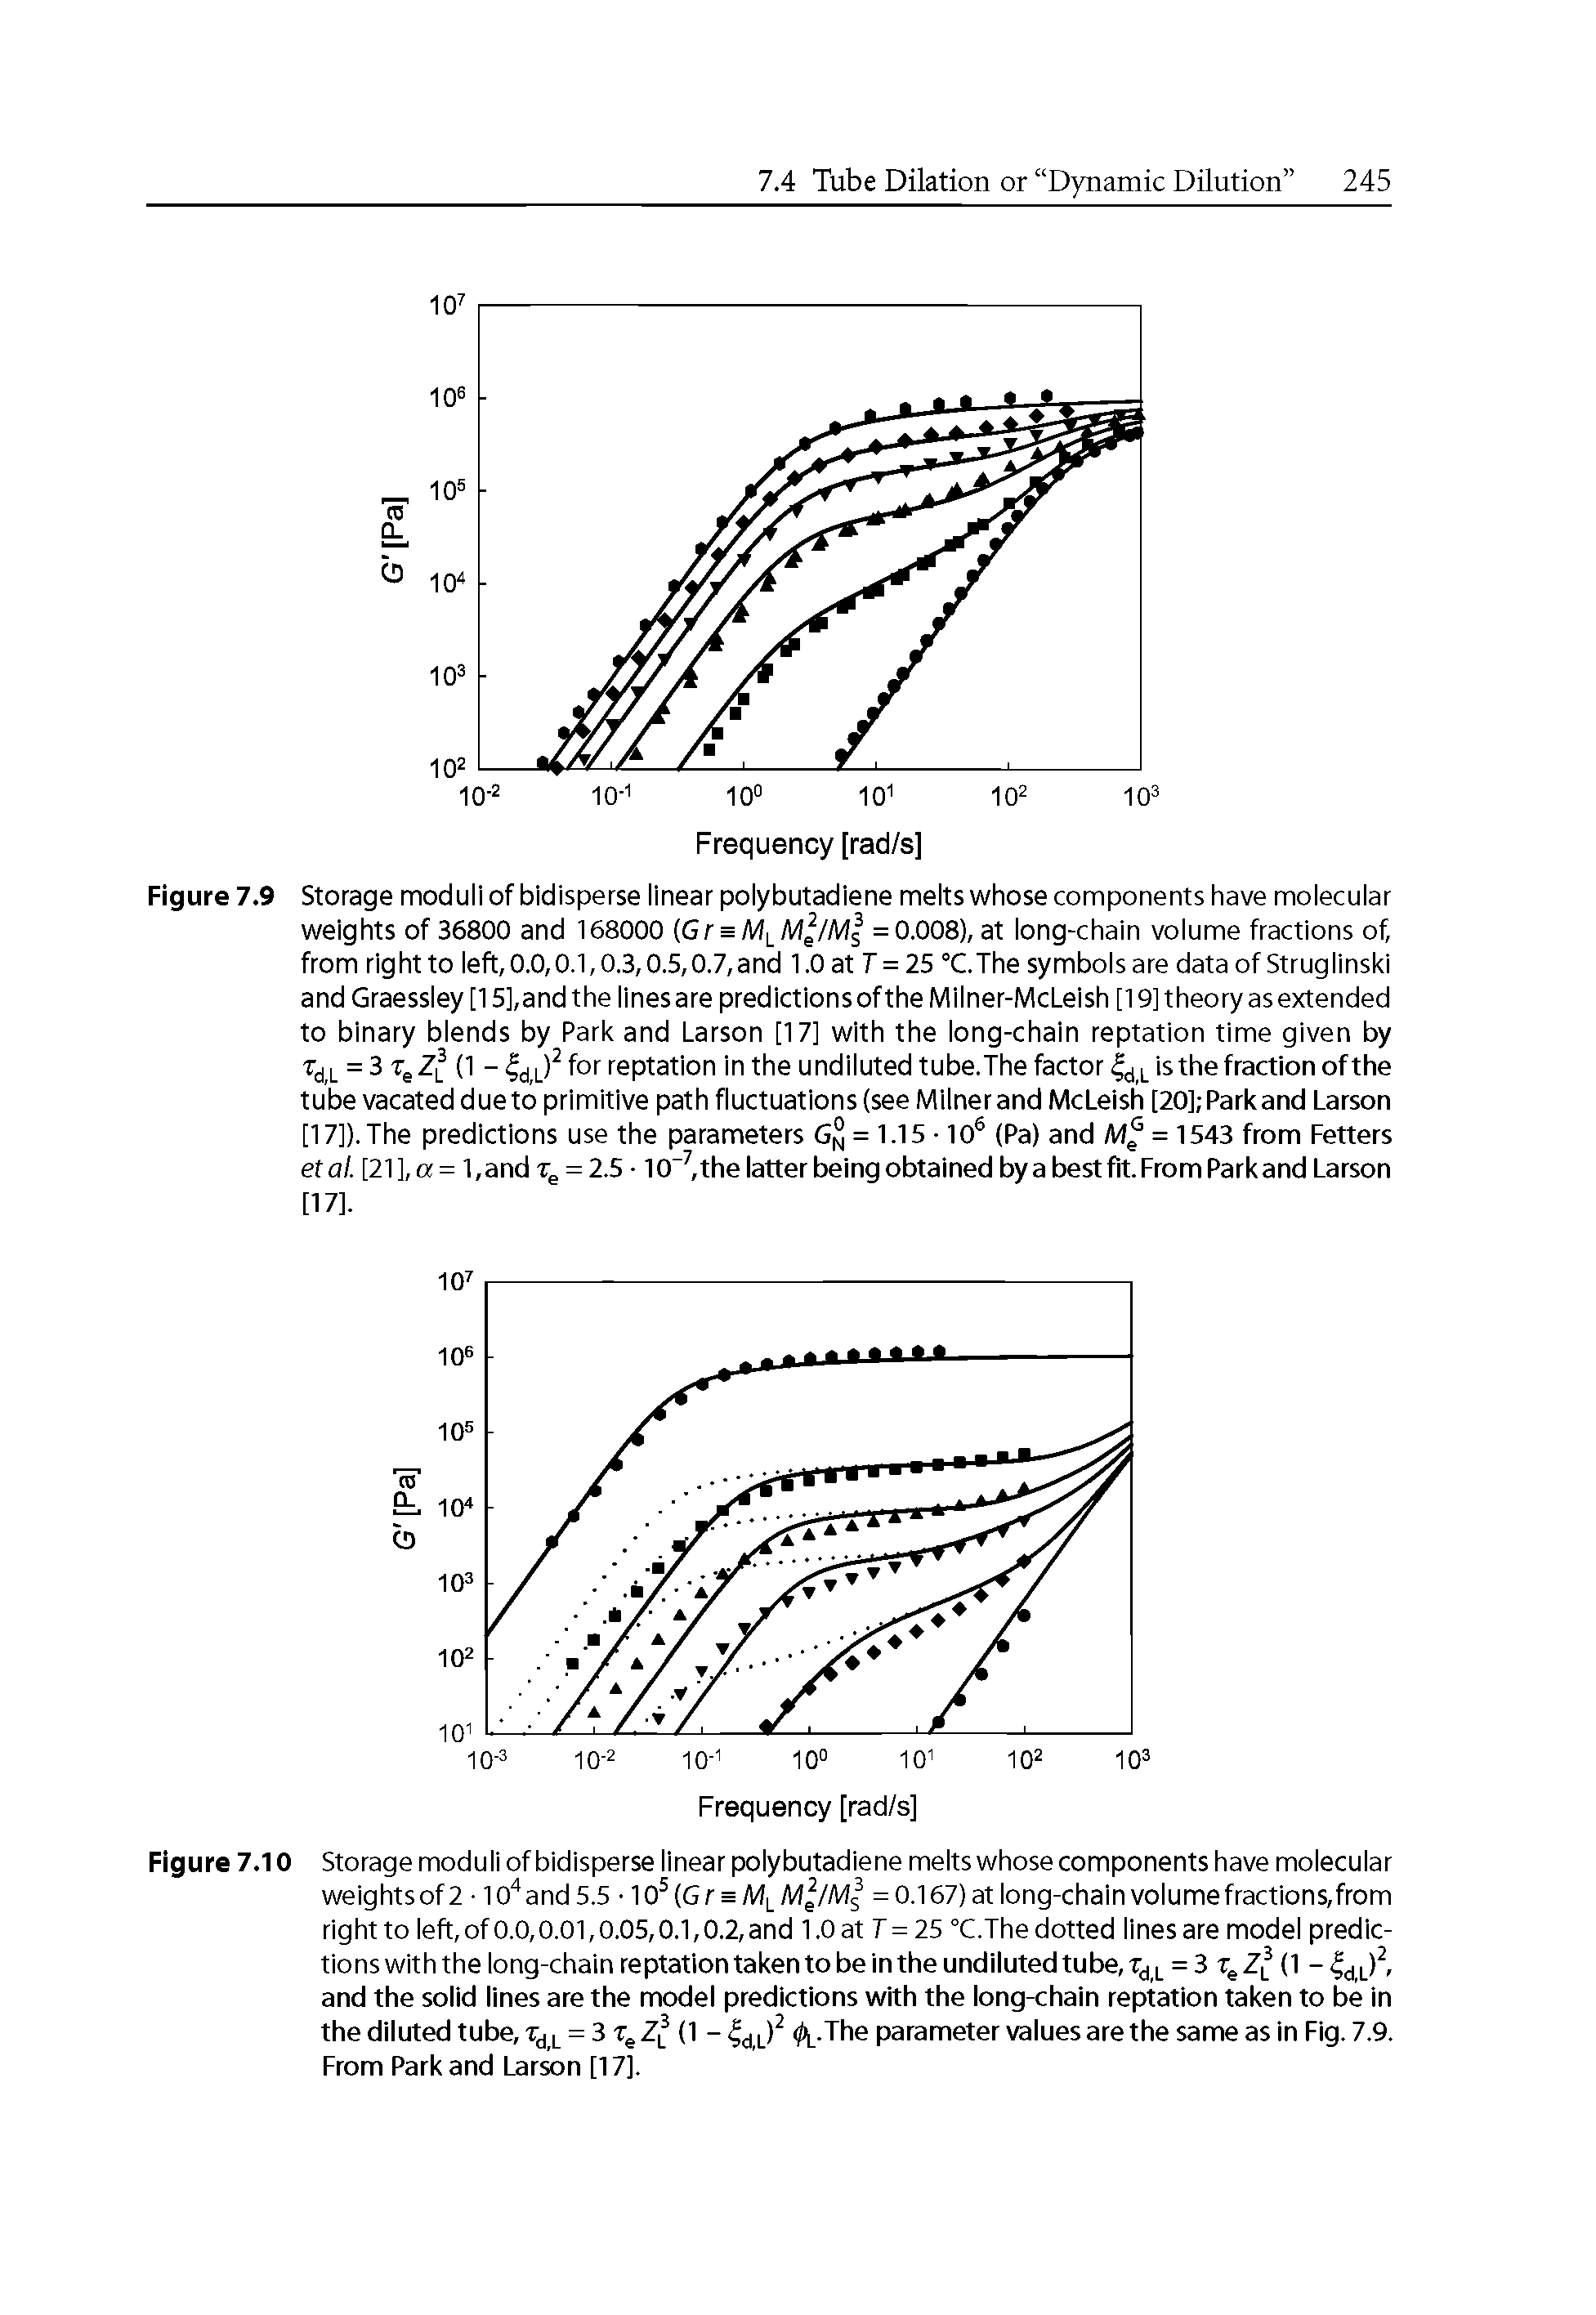 Figure 7.10 Storage moduli of bidisperse linear polybutadiene melts whose components have molecular weights of 2 10" and 5.5 10 (Gr = M M /M =0.167) at long-chain volume fractions,from right to left, of 0.0,0.01,0.05,0.1,0.2, and 1.0 at 7= 25 °C.The dotted linesare model predictions with the long-chainreptationtakentobeintheundilutedtube,T,jL = 3 TgZ f (1 and the solid lines are the model predictions with the long-chain reptation taken to be in the diluted tube, = 3 Tg Z (1 - (/y.The parameter values are the same as in Fig. 7.9. From Park and Larson [17].